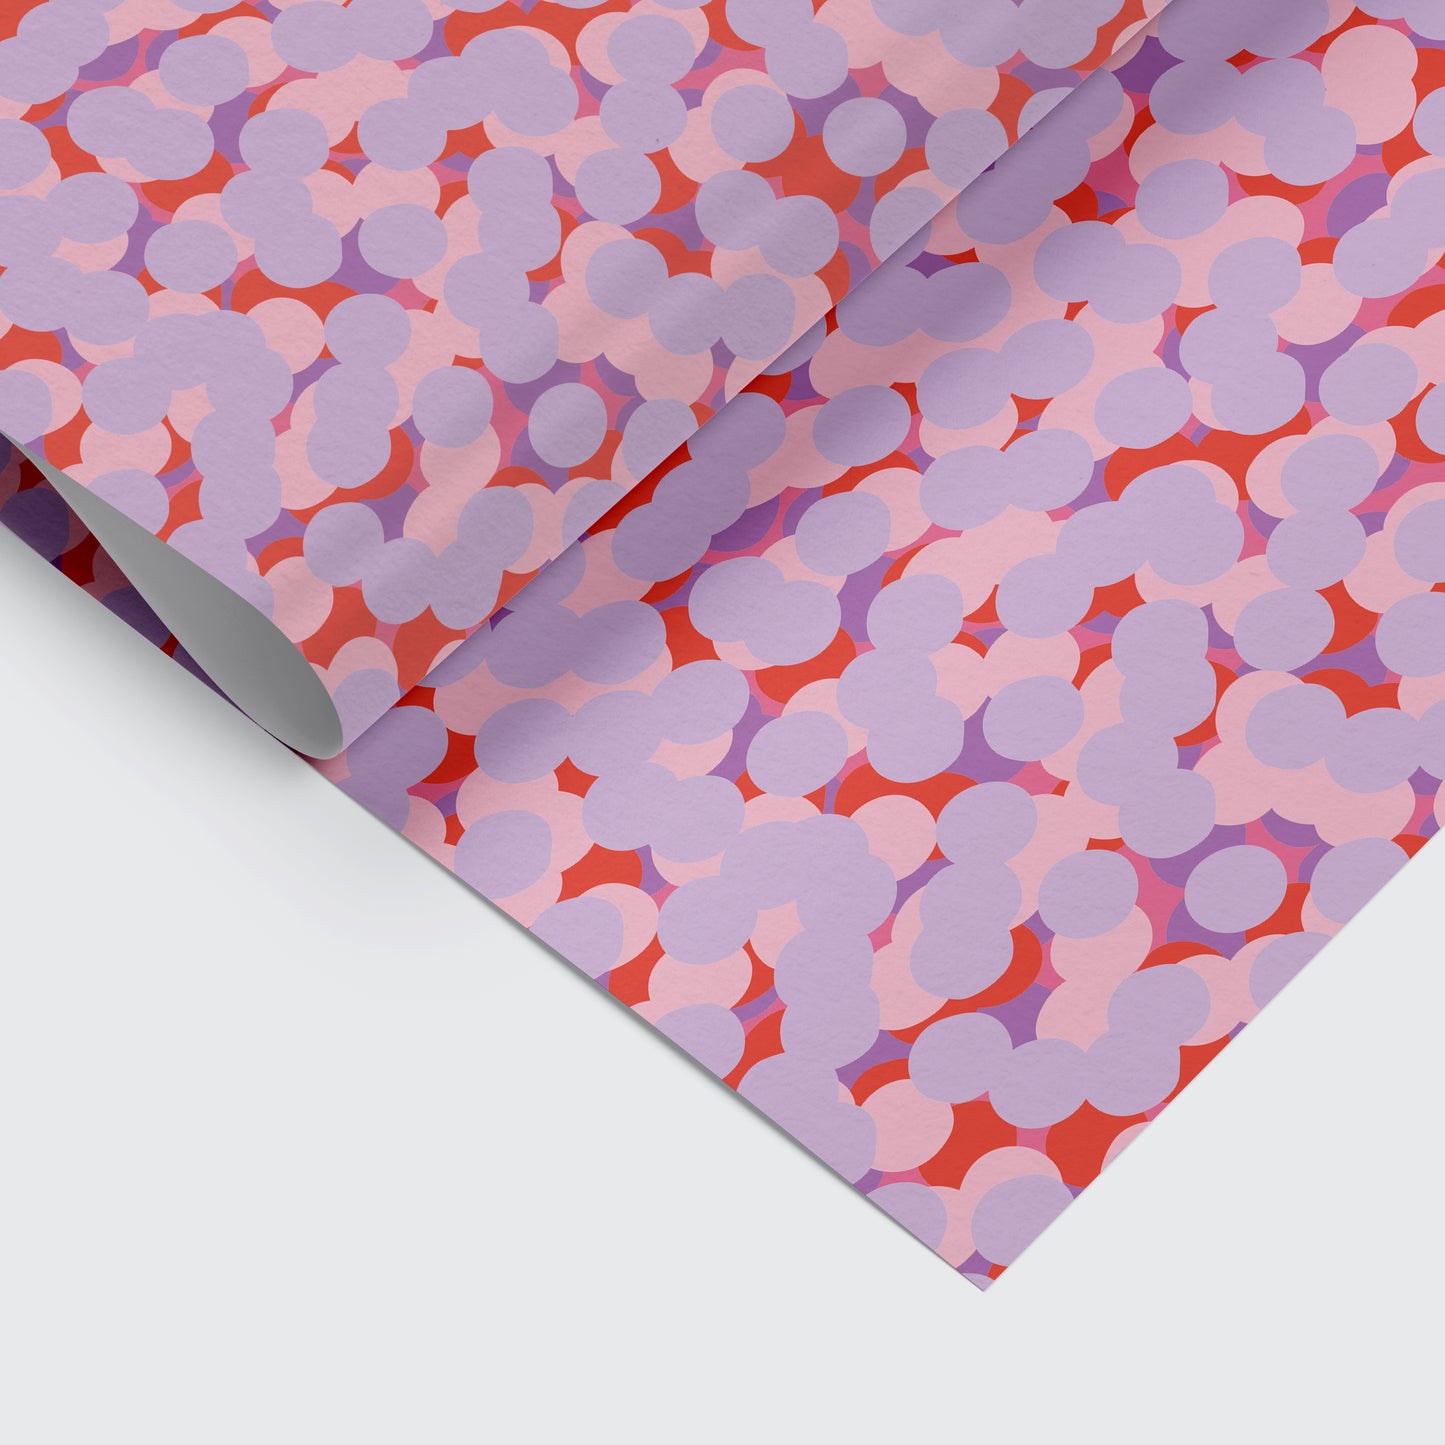 wrapping paper with cherry blossom pattern on it